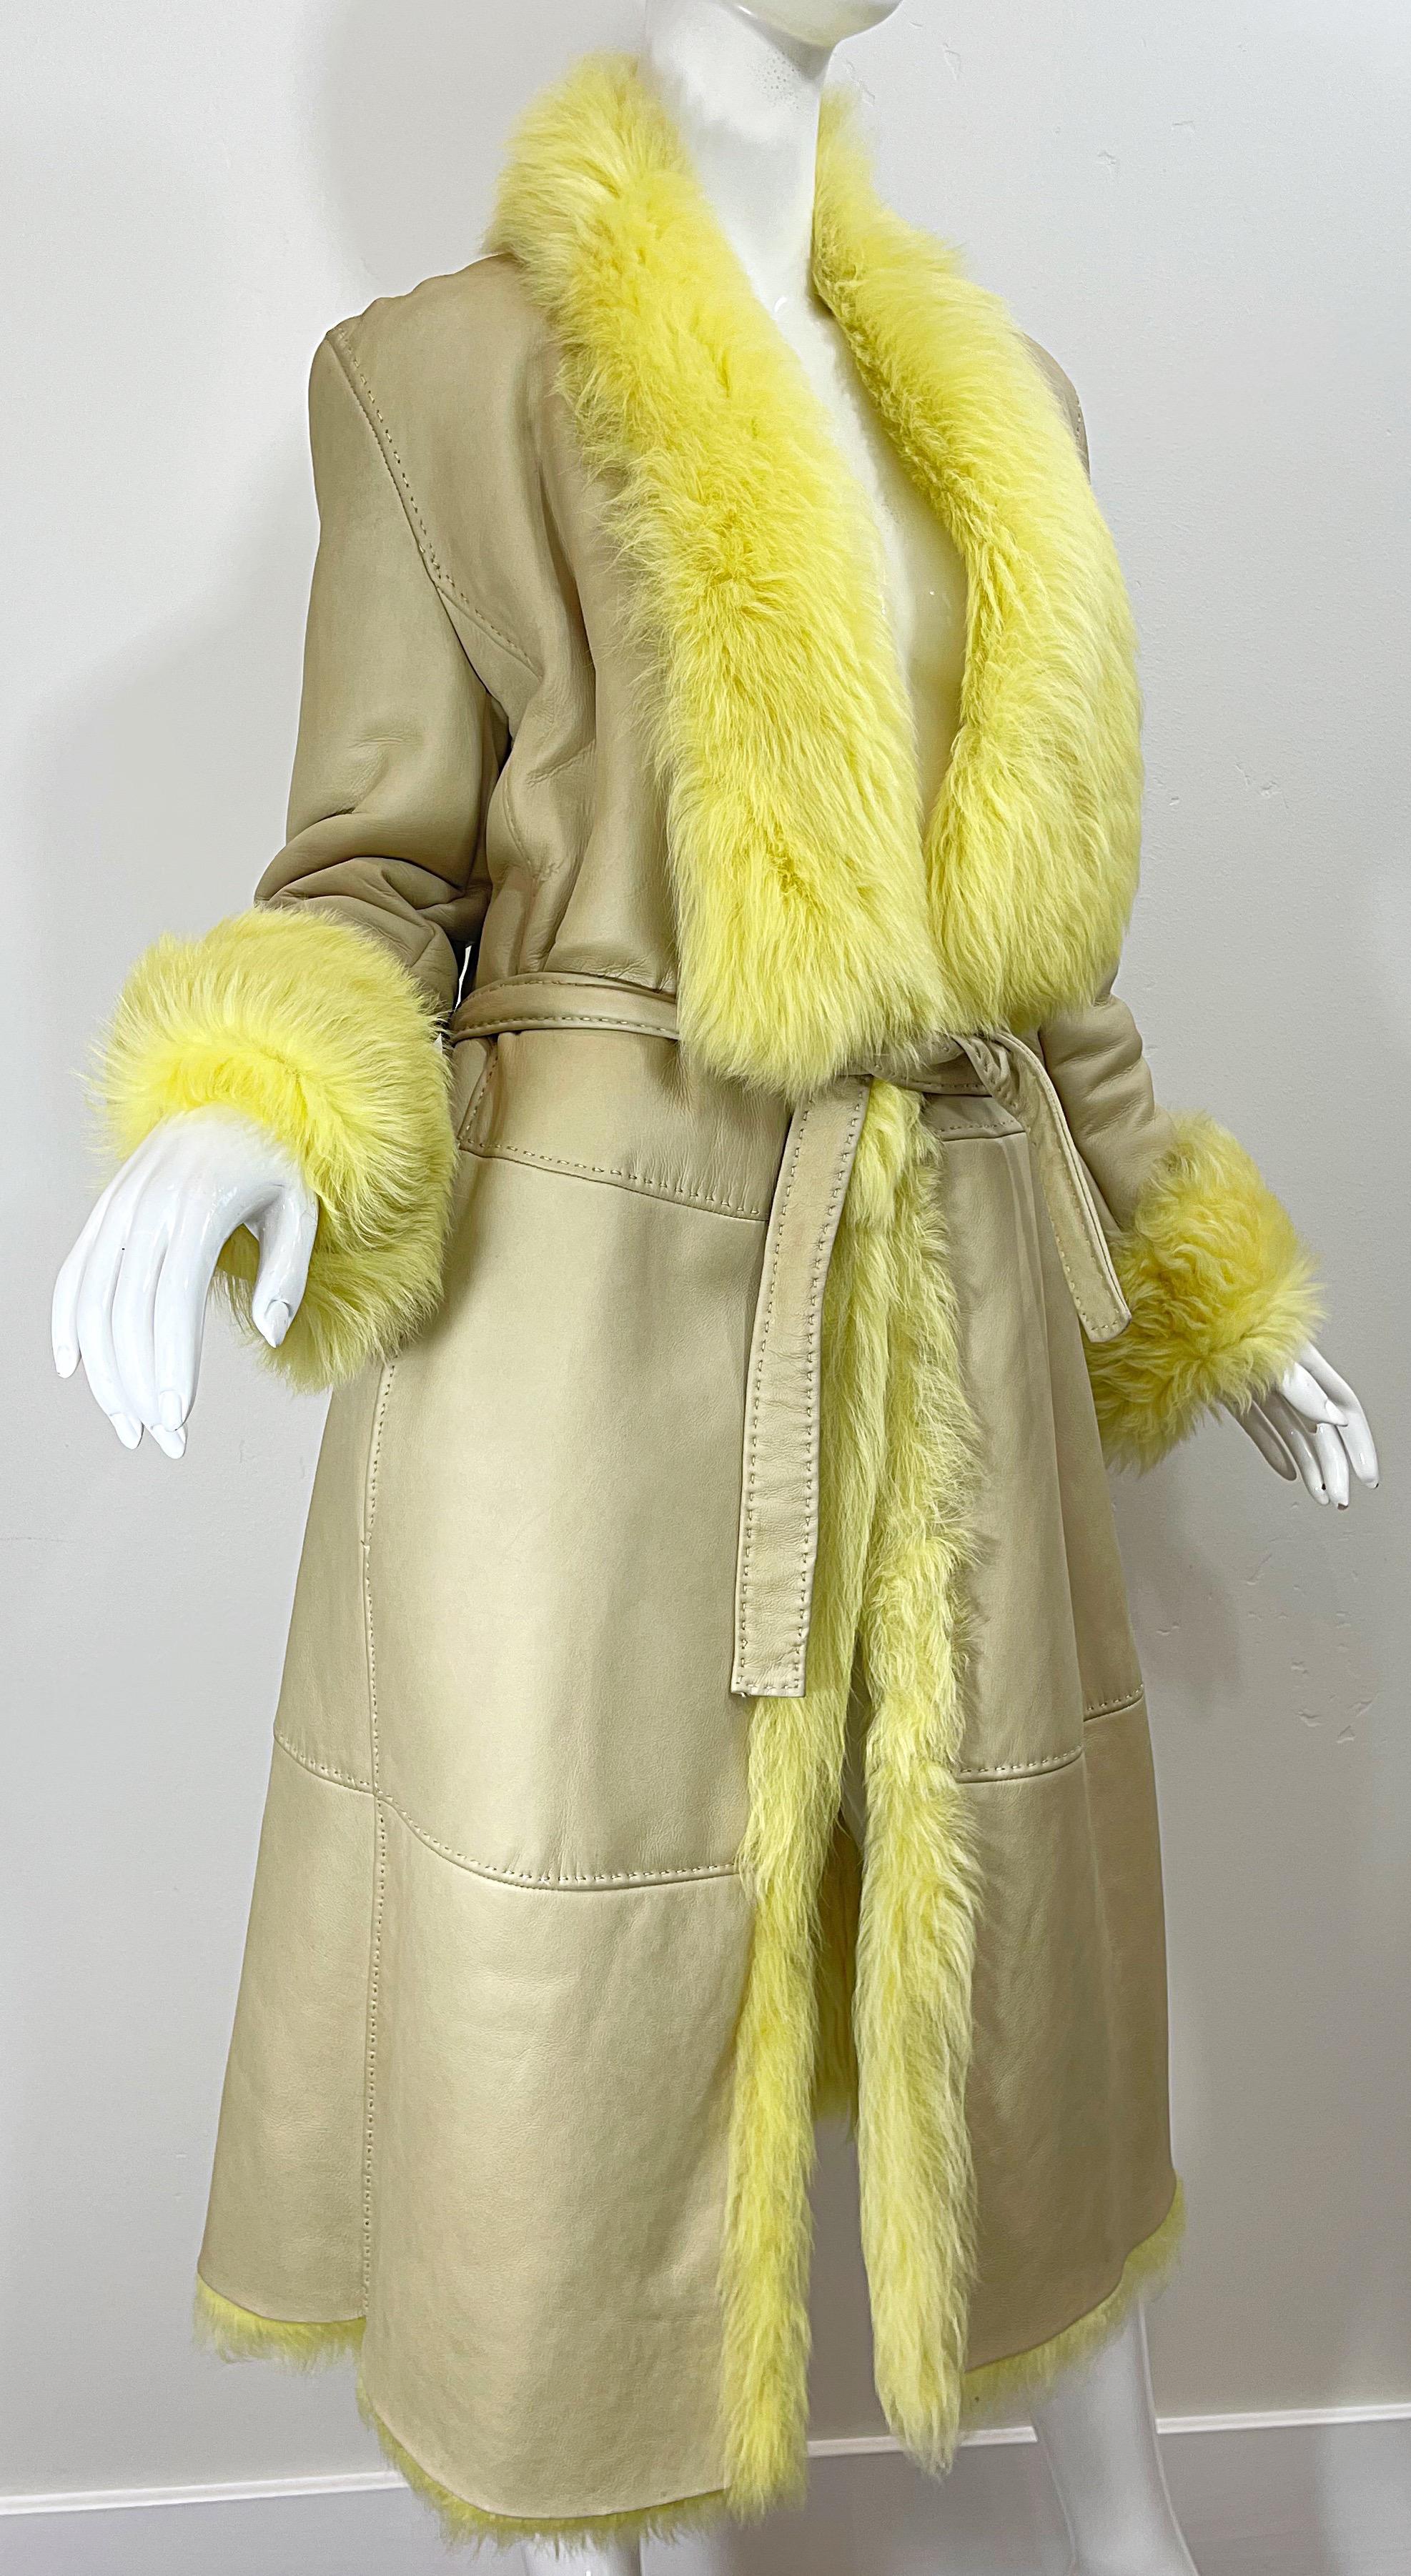 1990s Gianni Versace Tan Leather Yellow Shearling Fur Vintage Trench Coat Jacket For Sale 8